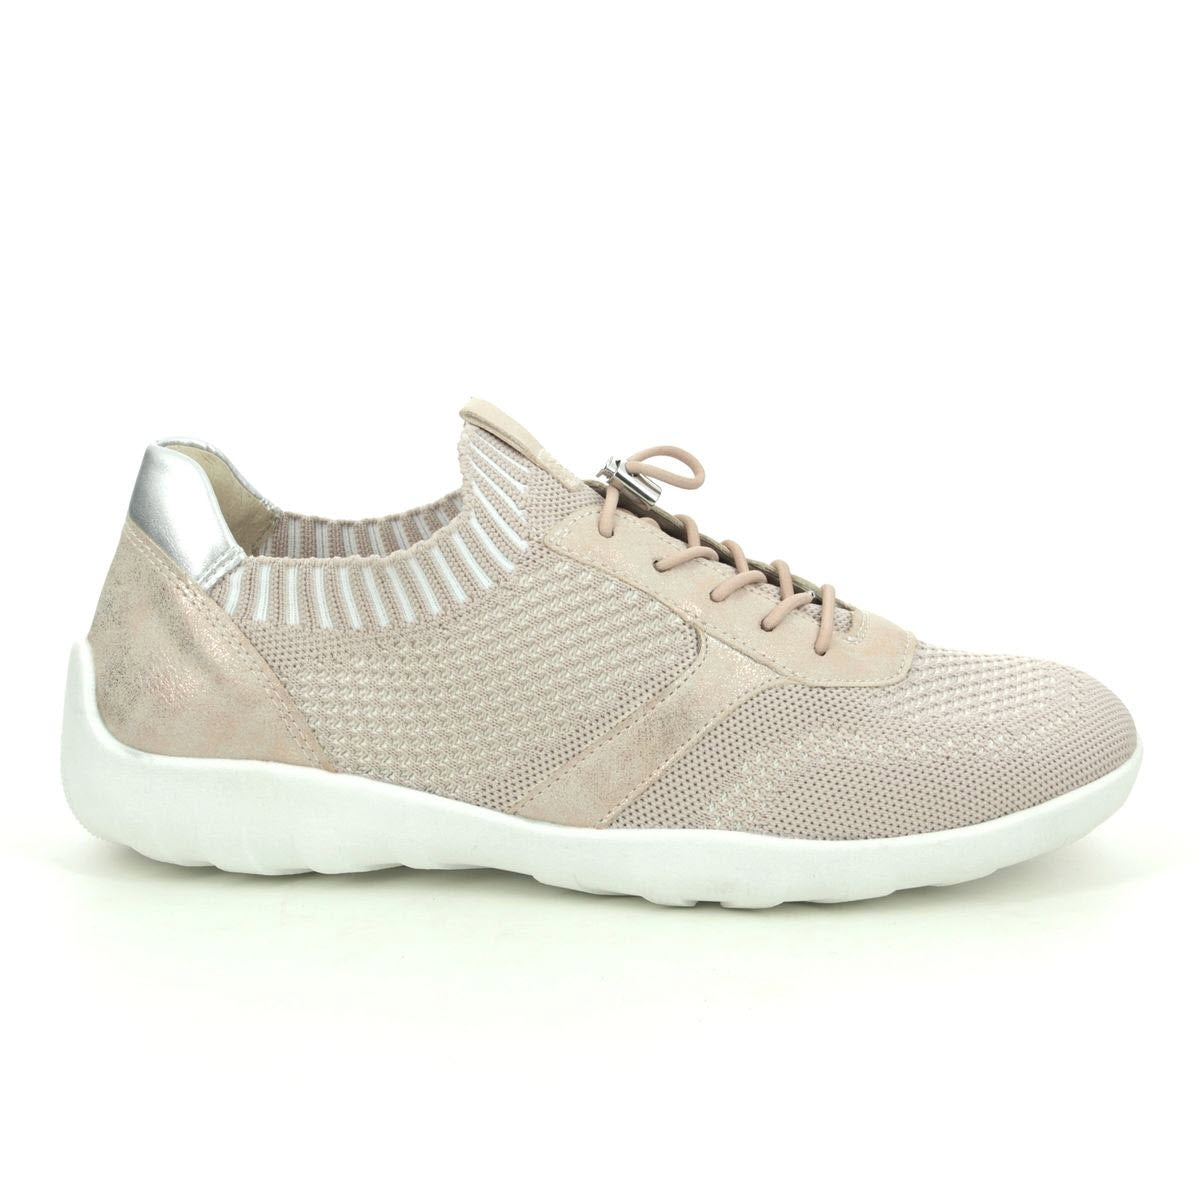 A beige Remonte Minimal Mesh Sneaker Vanilla - Womens athletic shoe against a white background.